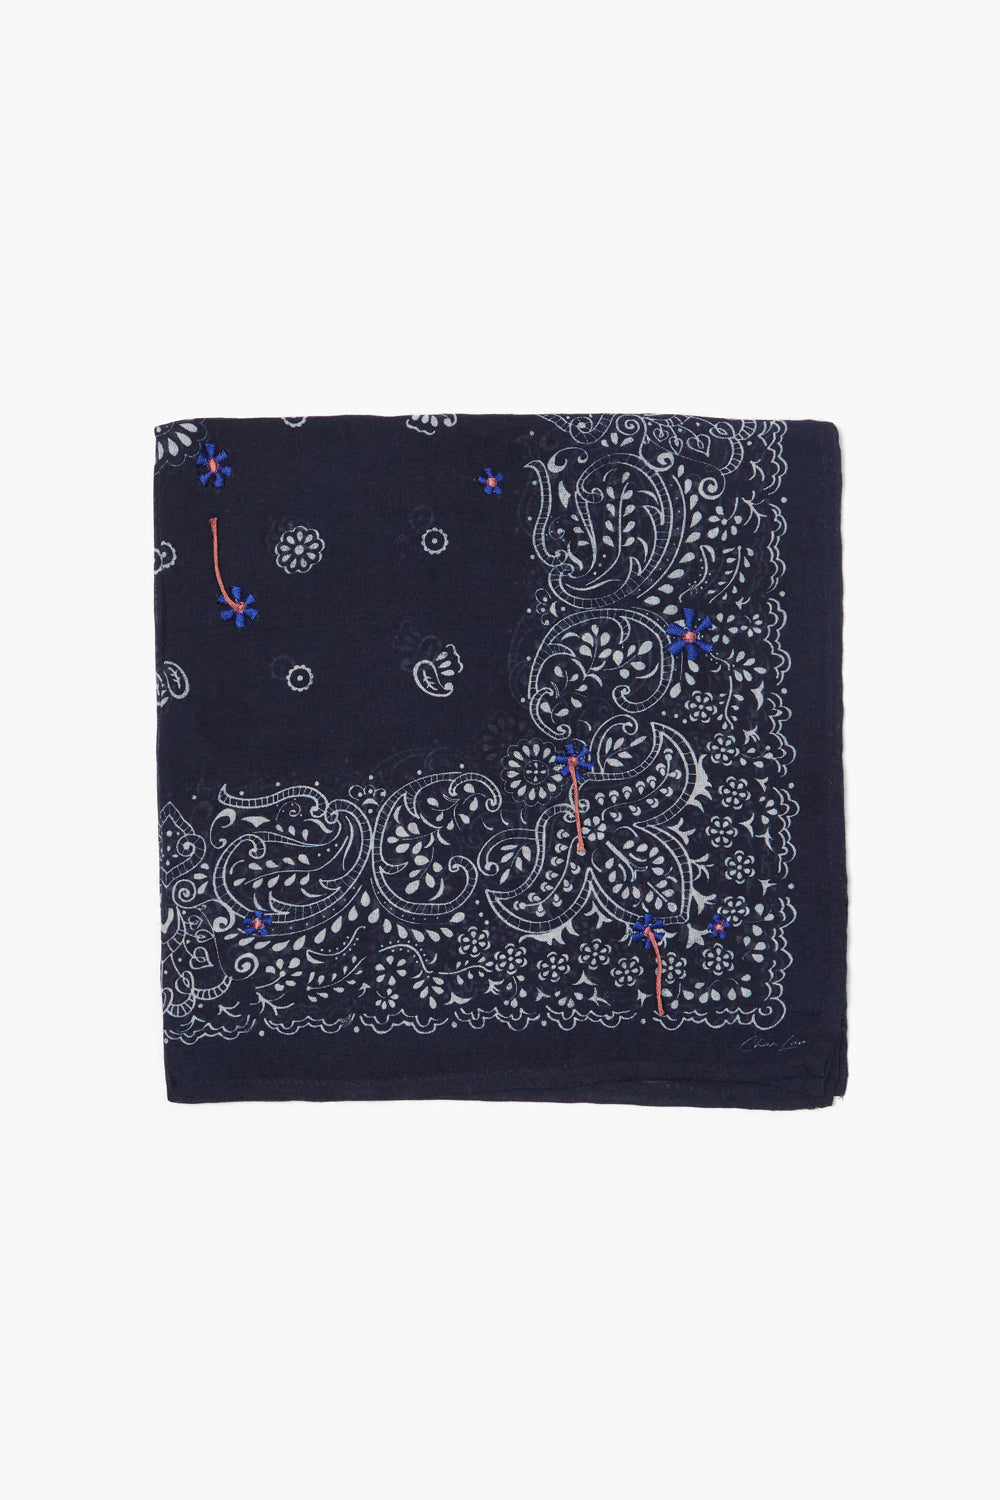 EMBROIDERED FLORAL BANDANA-DARK SAPPHIRE - Kingfisher Road - Online Boutique